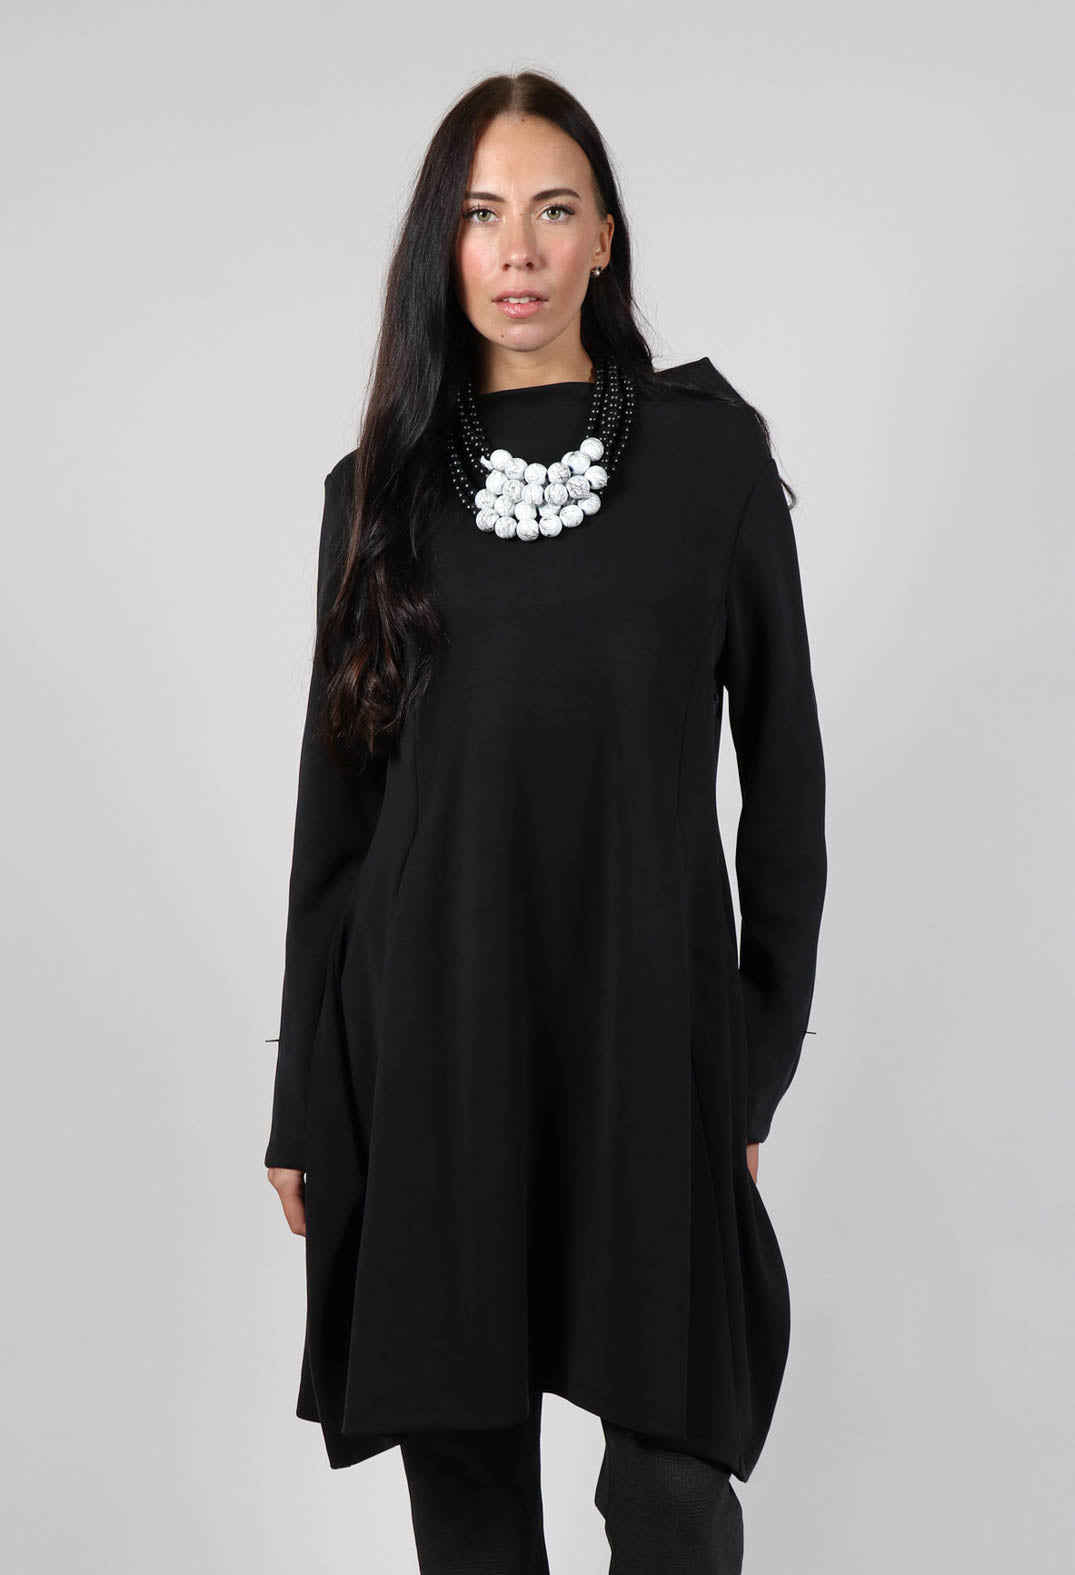 Long Sleeve Dress with Boat Neck in Black